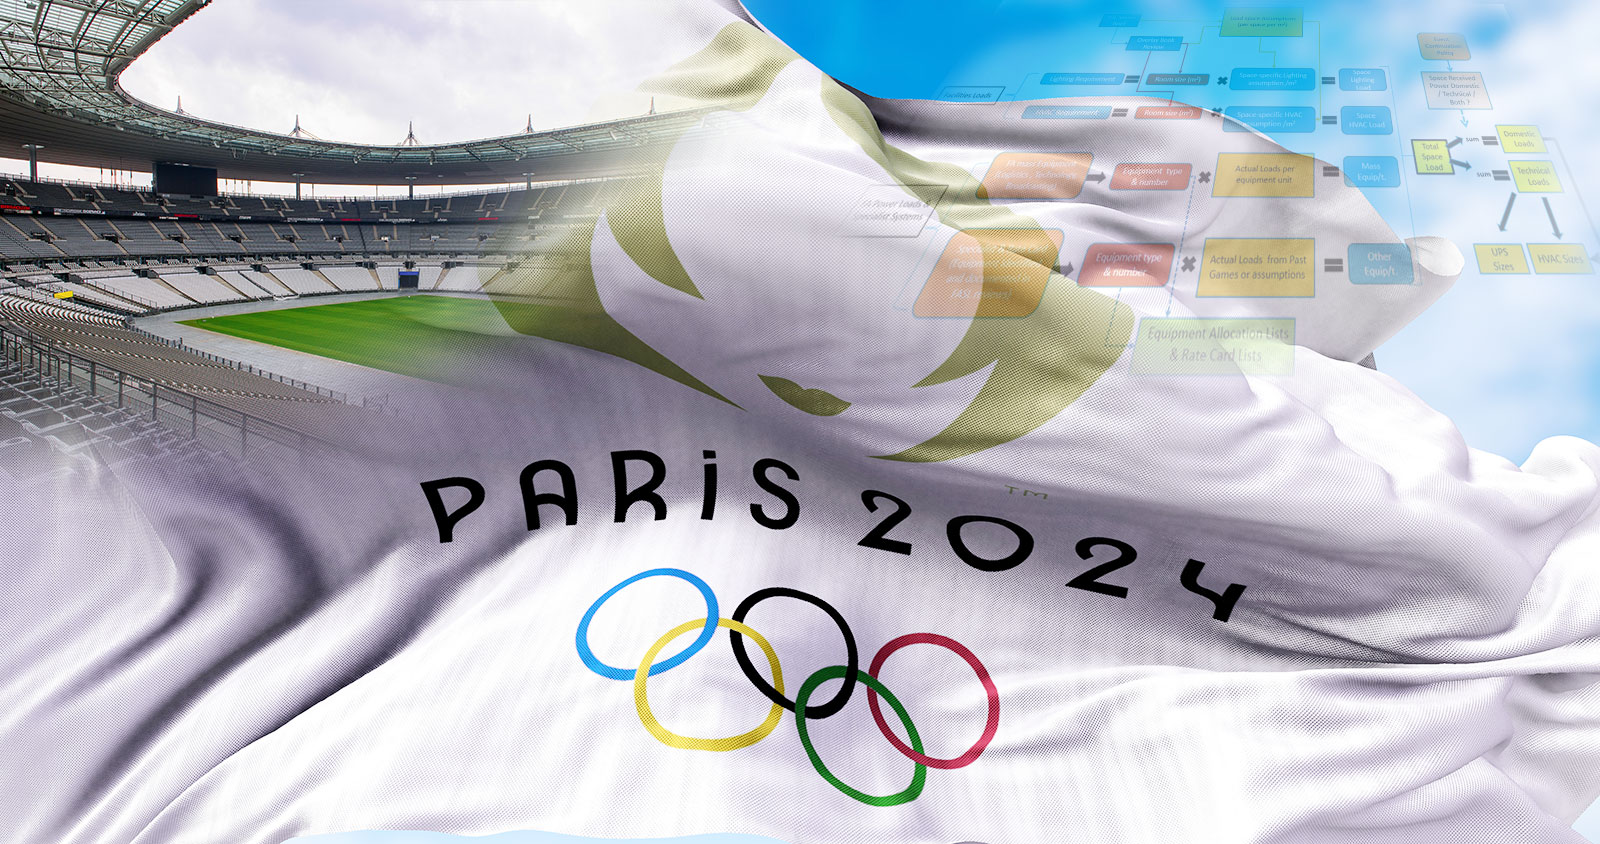 Integrated ITDC selected to be Energy expertise and technology providers for the Paris 2024 Olympic Games